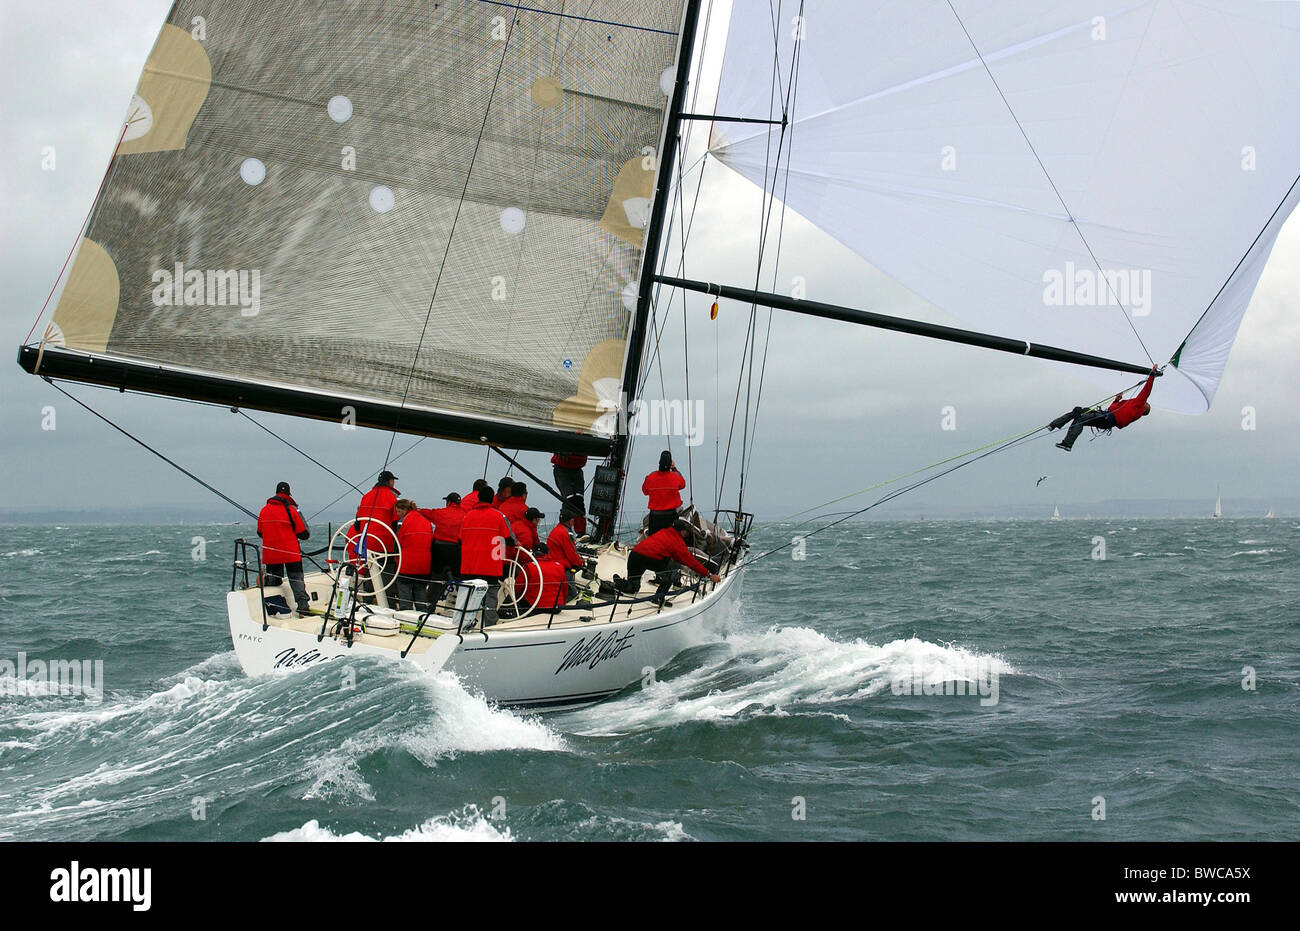 Man swinging from spinnkaer pole on 'Wild Oats'. Admirals Cup, Sydney, Australia, 2003. The Australian team from the Royal Princ Stock Photo